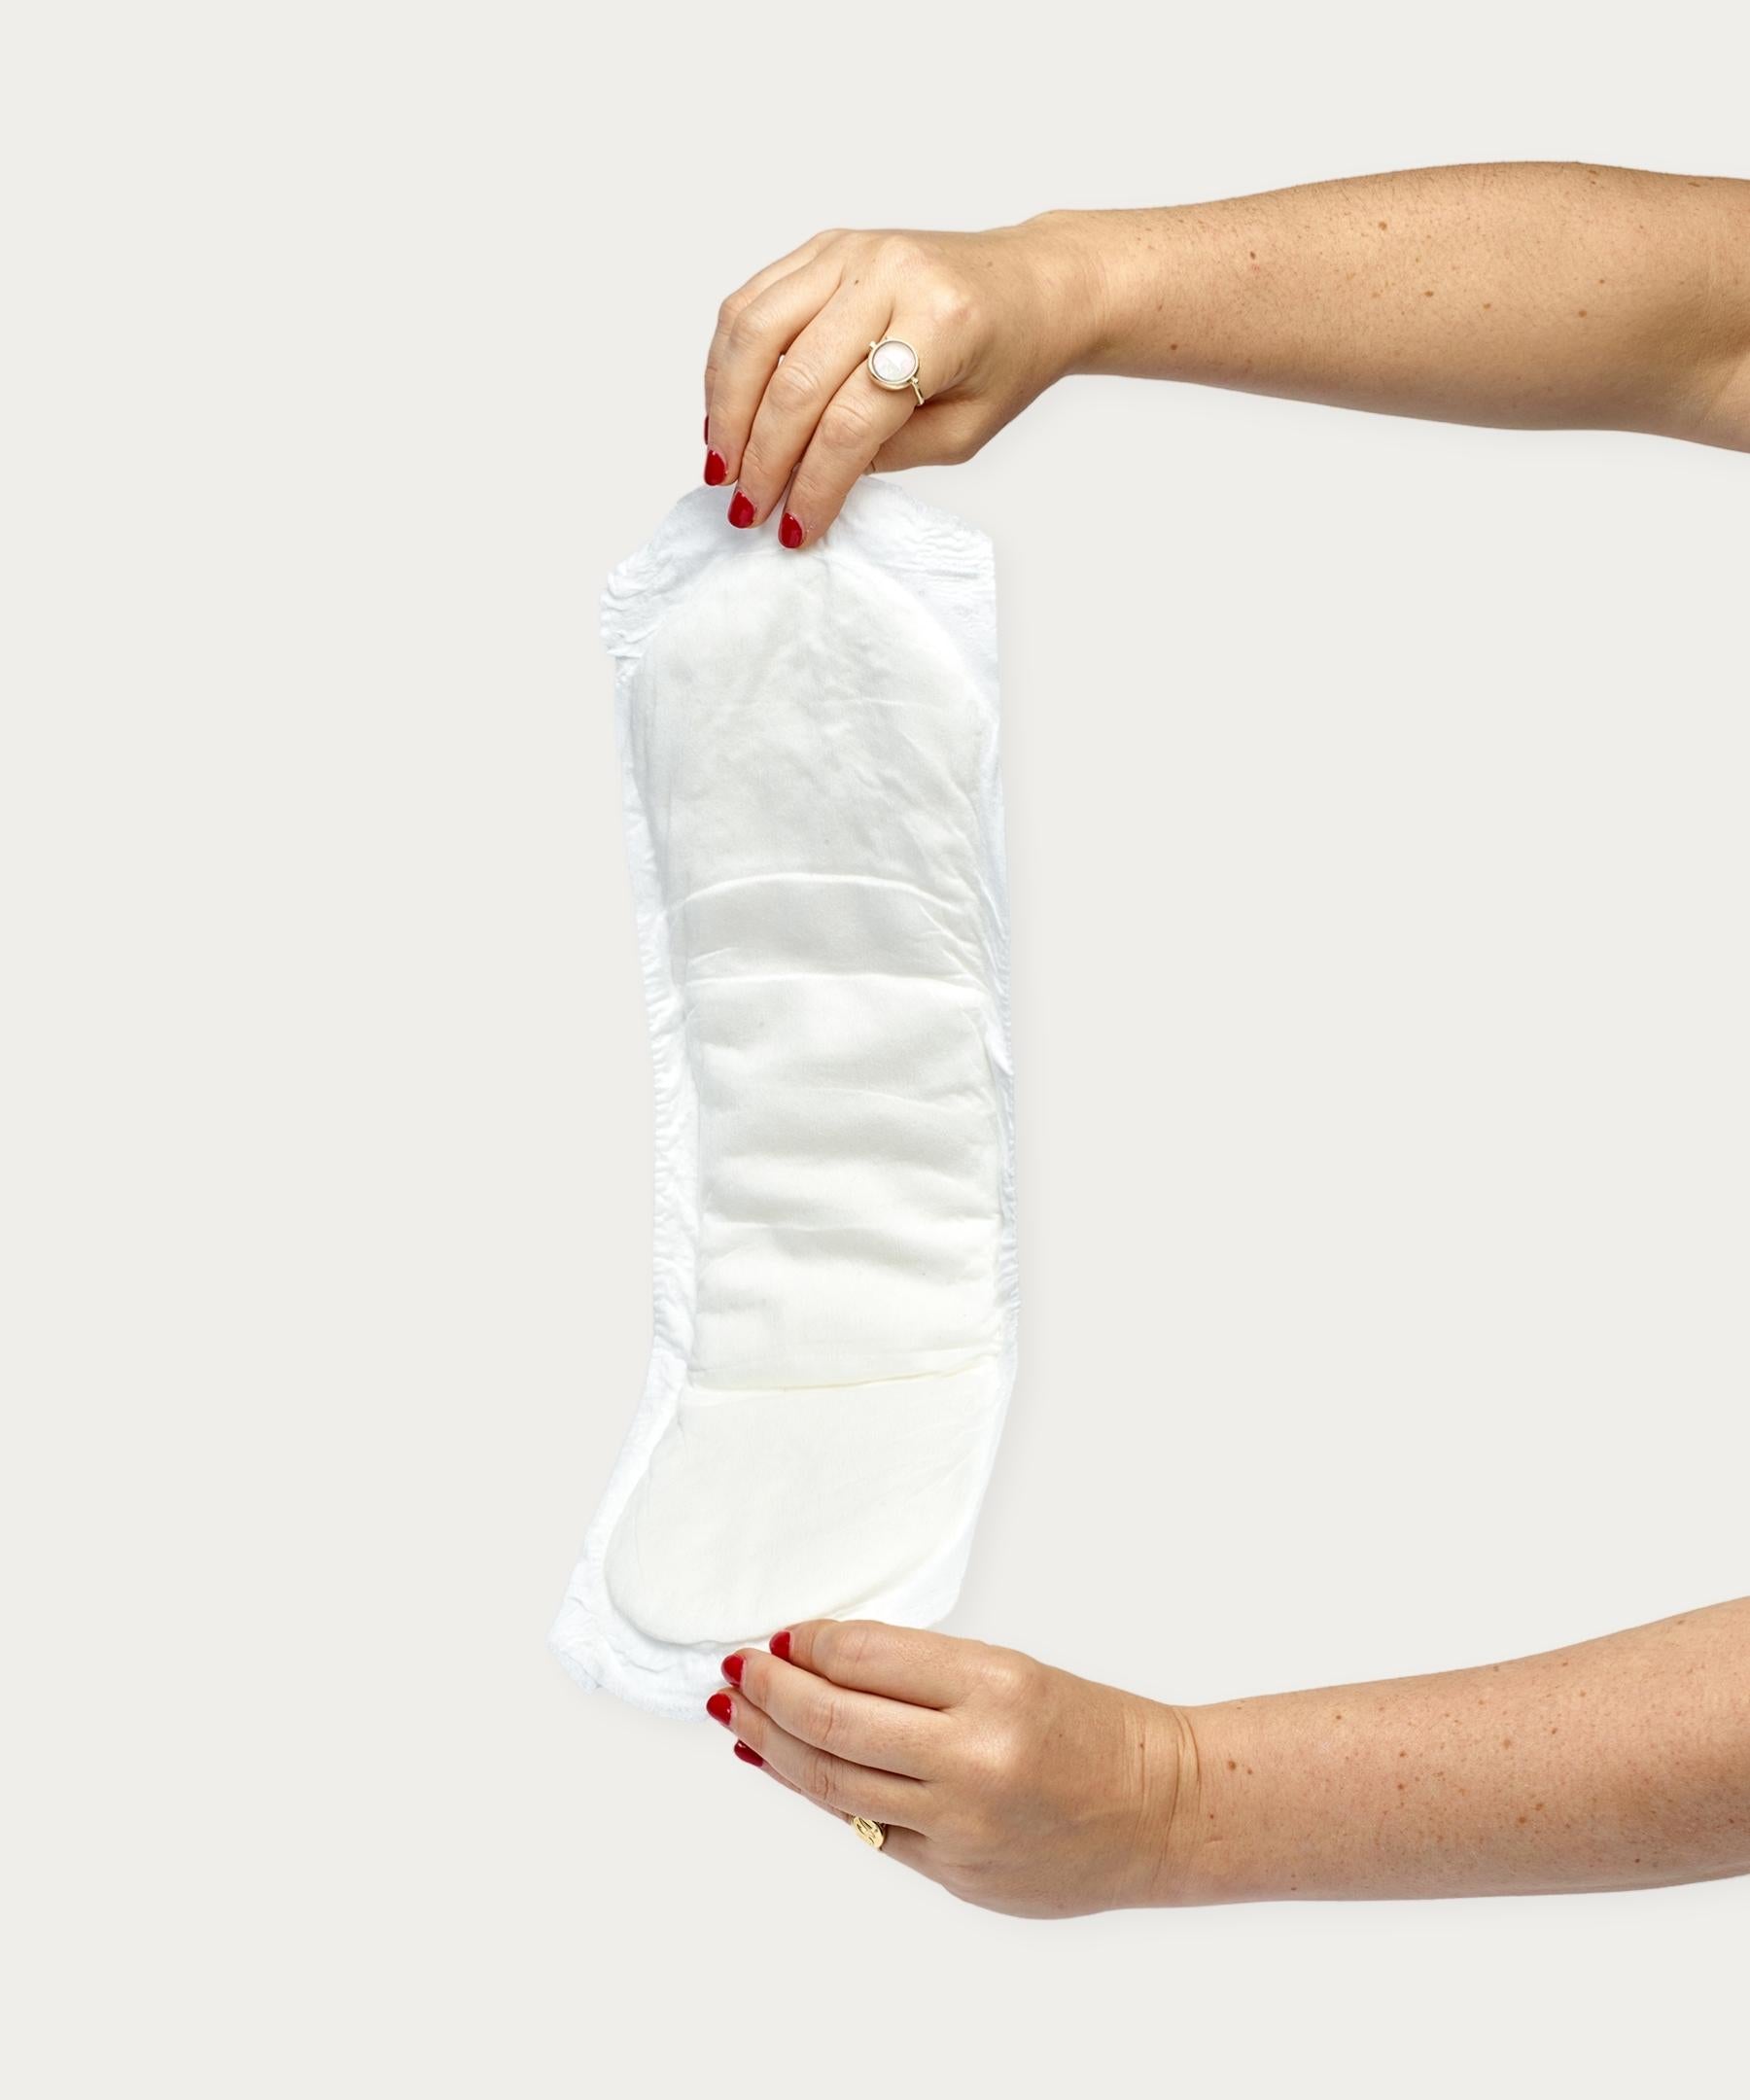 Hospital Sterile Maternity Pads with tails